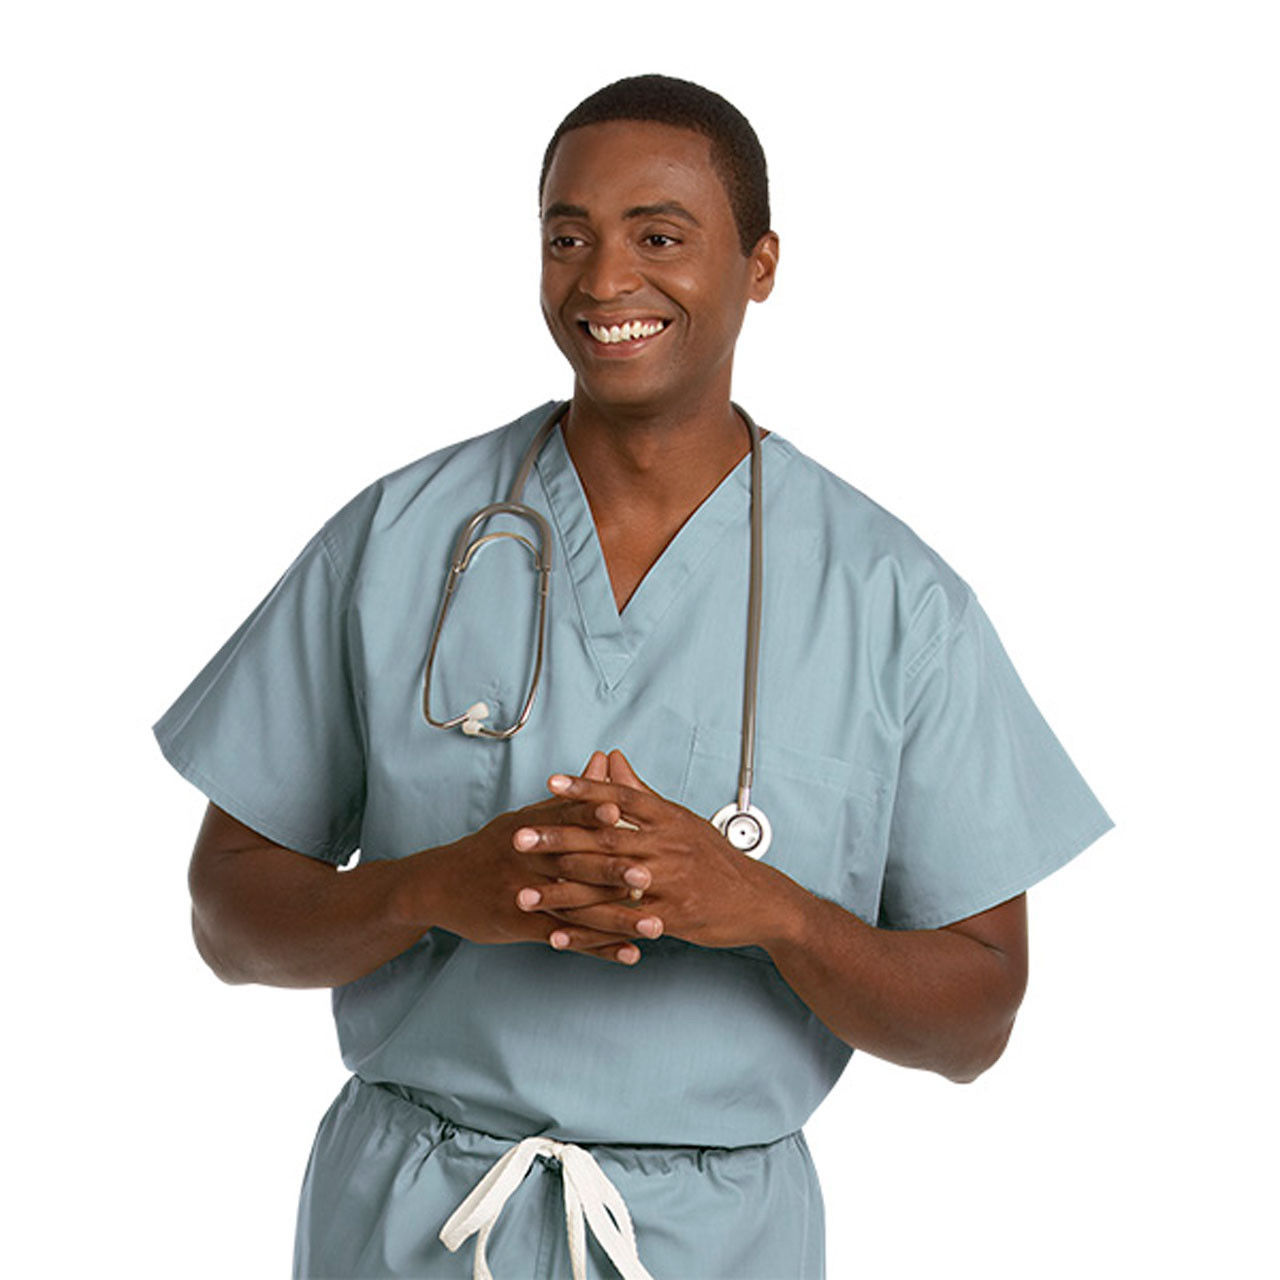 What are the features of these affordable surgical scrubs?